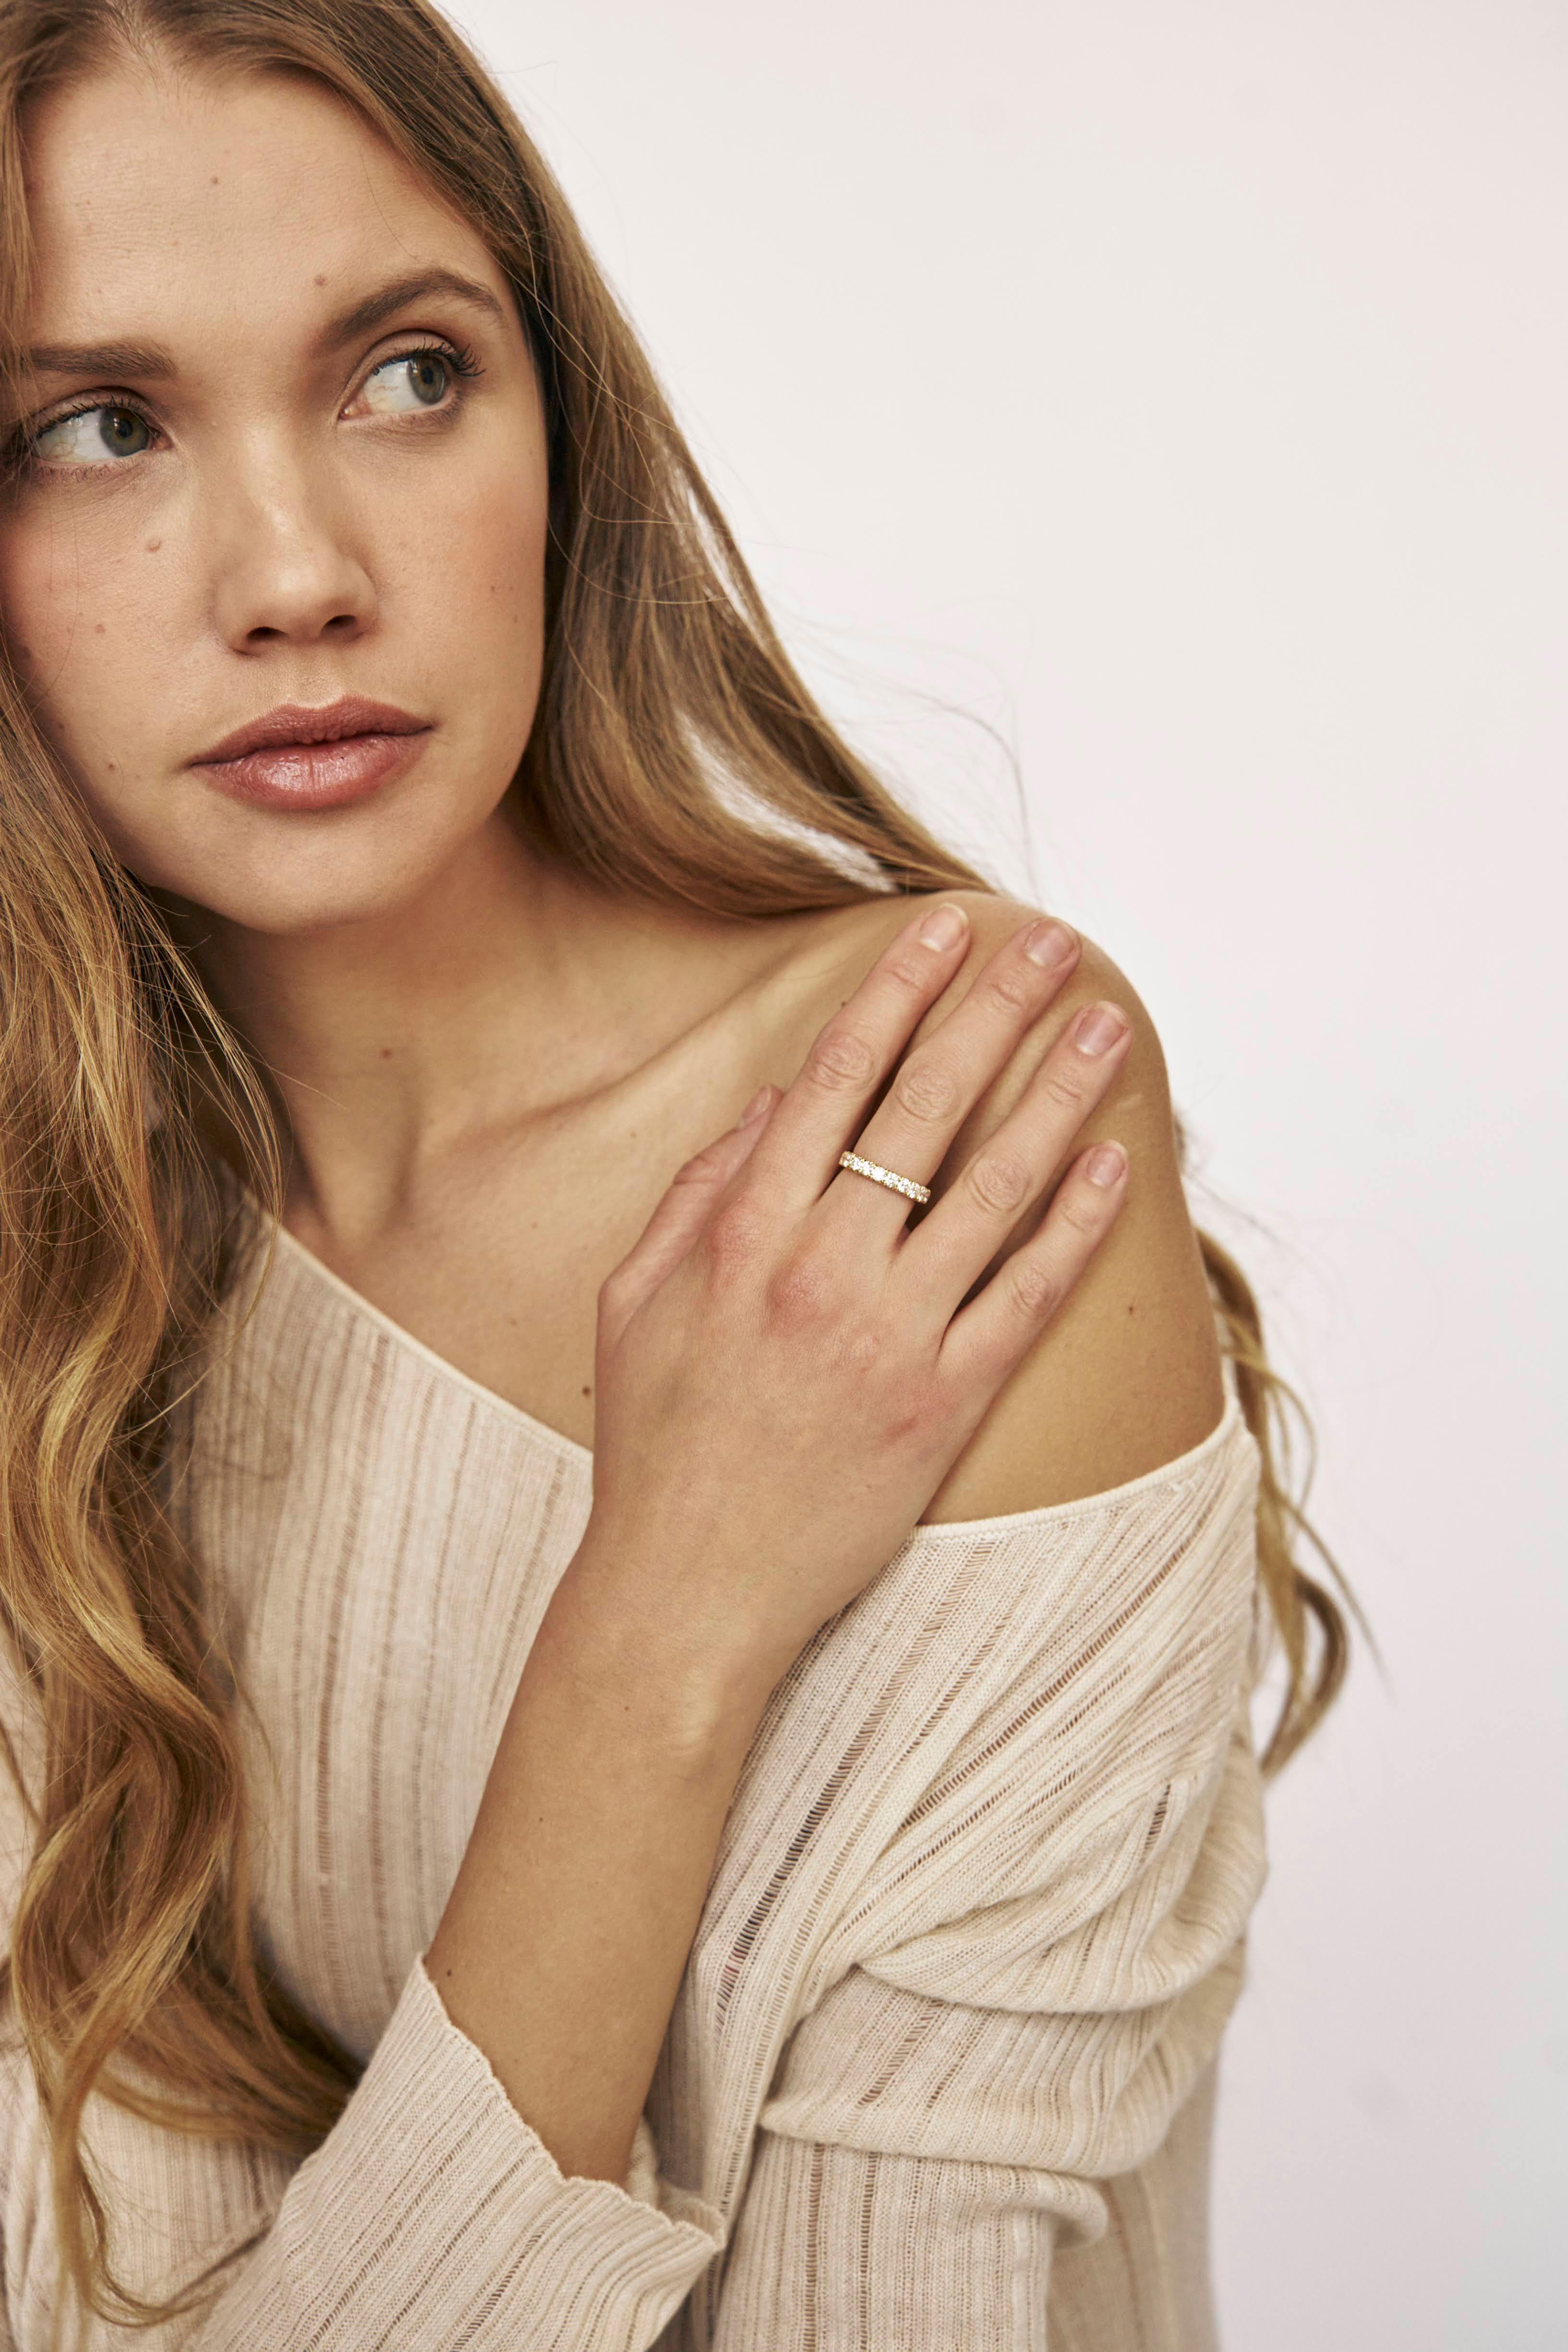 Our most classic and essential ring. Stack them together, with other rings or simply wear them alone. You can’t go wrong with the Half Band ring, in fact, you’ll love it!

18kt Yellow Gold
Dimensions: 2.8mm thick
Size: 6.5
Total Carat Weight: